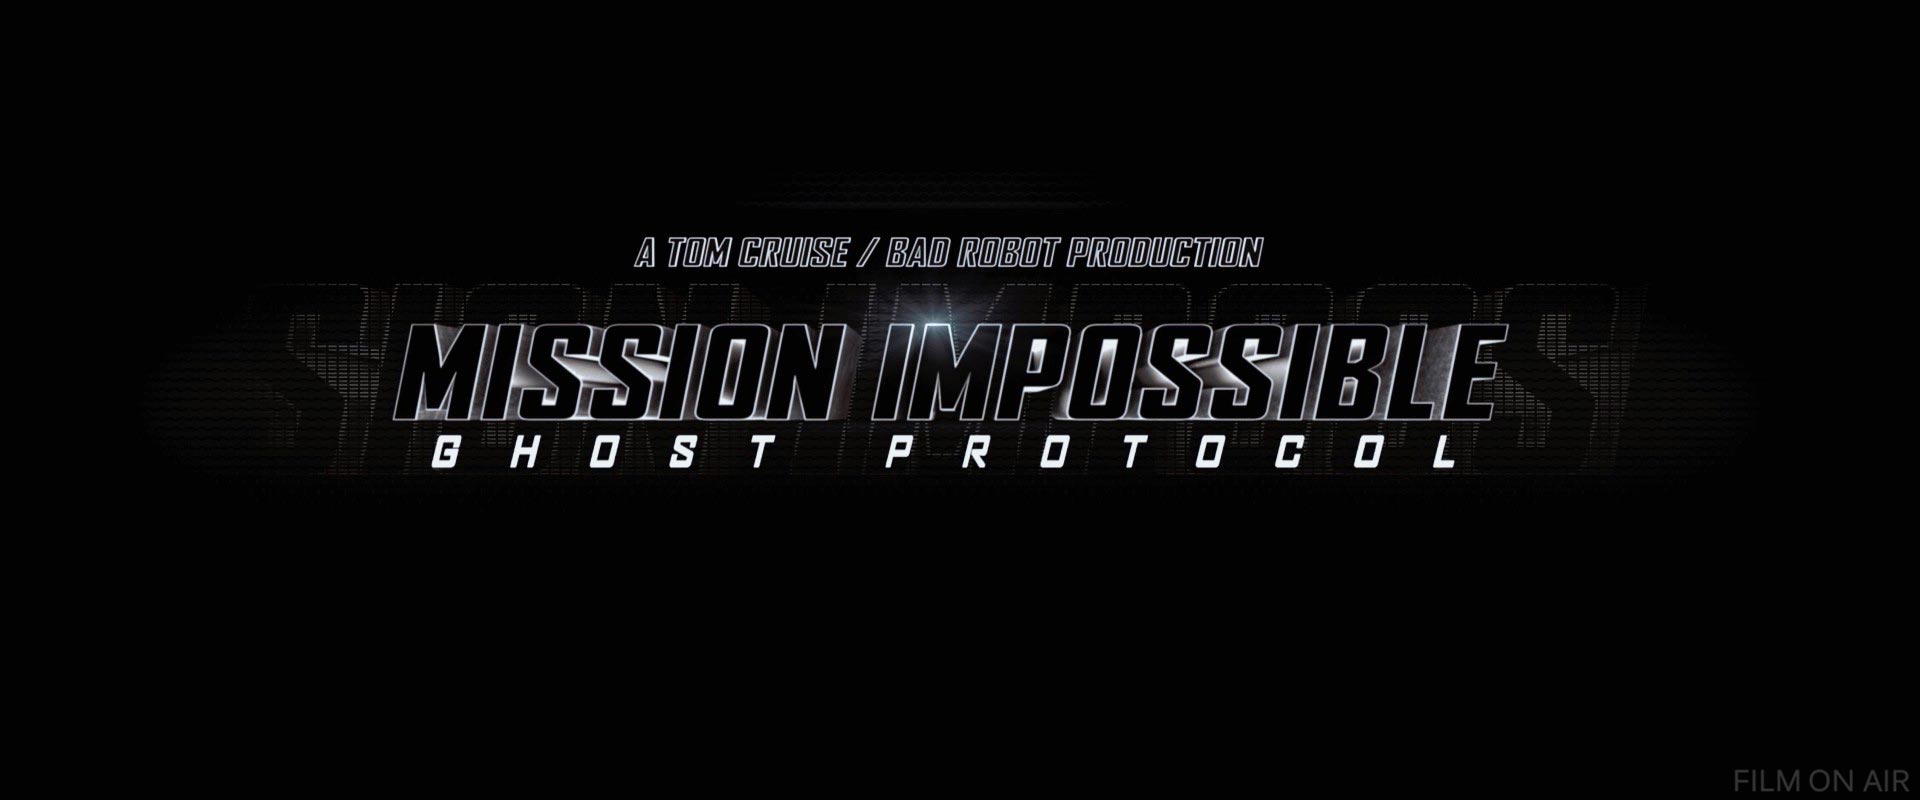 Mission Impossible 4 Ghost Protocol Logo
 in Mission: Impossible 4 - Ghost Protocol in Mission: Impossible - Ghost Protocol